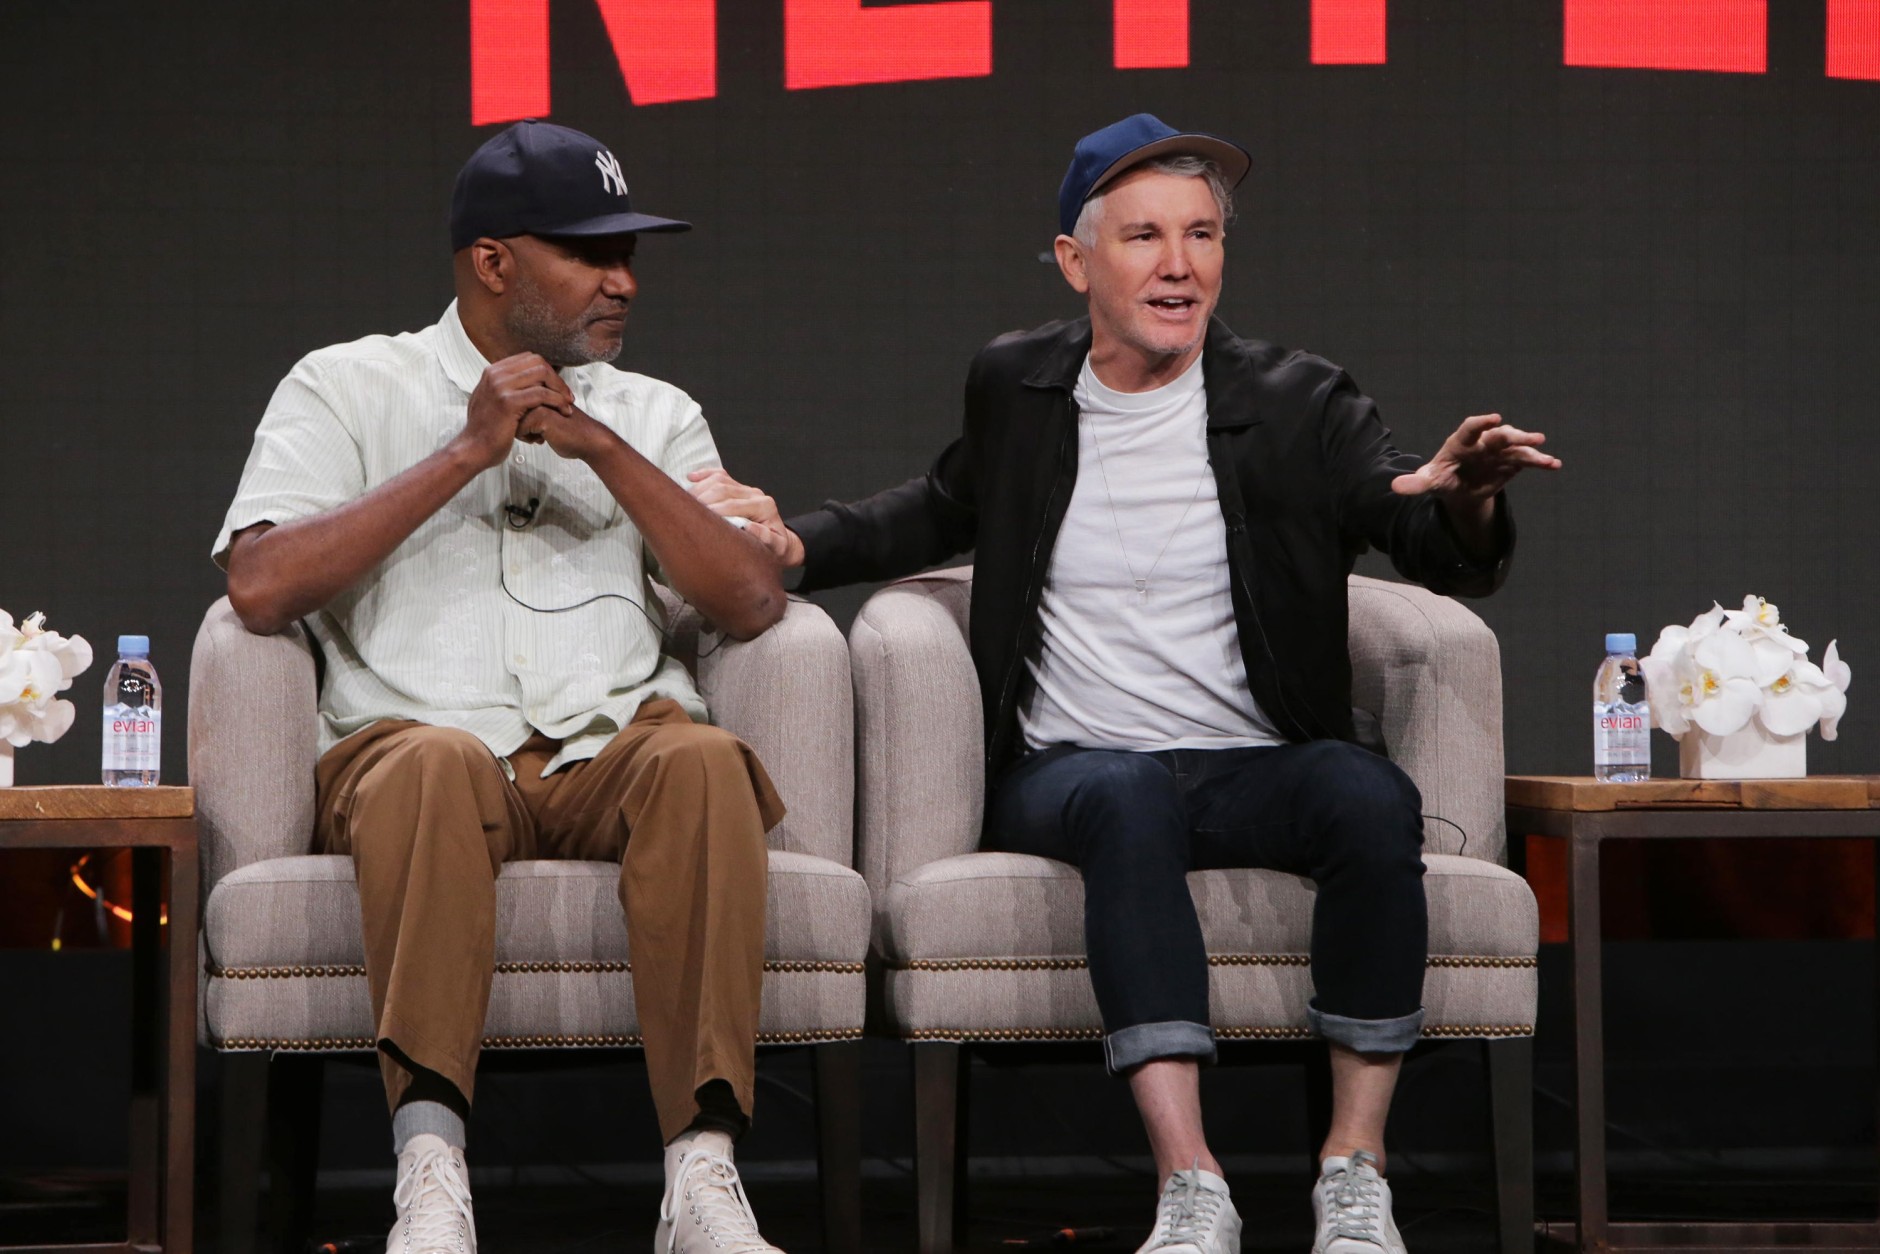 Nelson George, Producer and Writer, and  Baz Luhrmann, Executive Producer/Writer and Director, speak on panel for "The Get Down" at Netflix 2016 Summer TCA at the Beverly Hilton Hotel on Wednesday, July 27, 2016, in Los Angeles. (Photo by Eric Charbonneau/Invision for Netflix/AP Images)